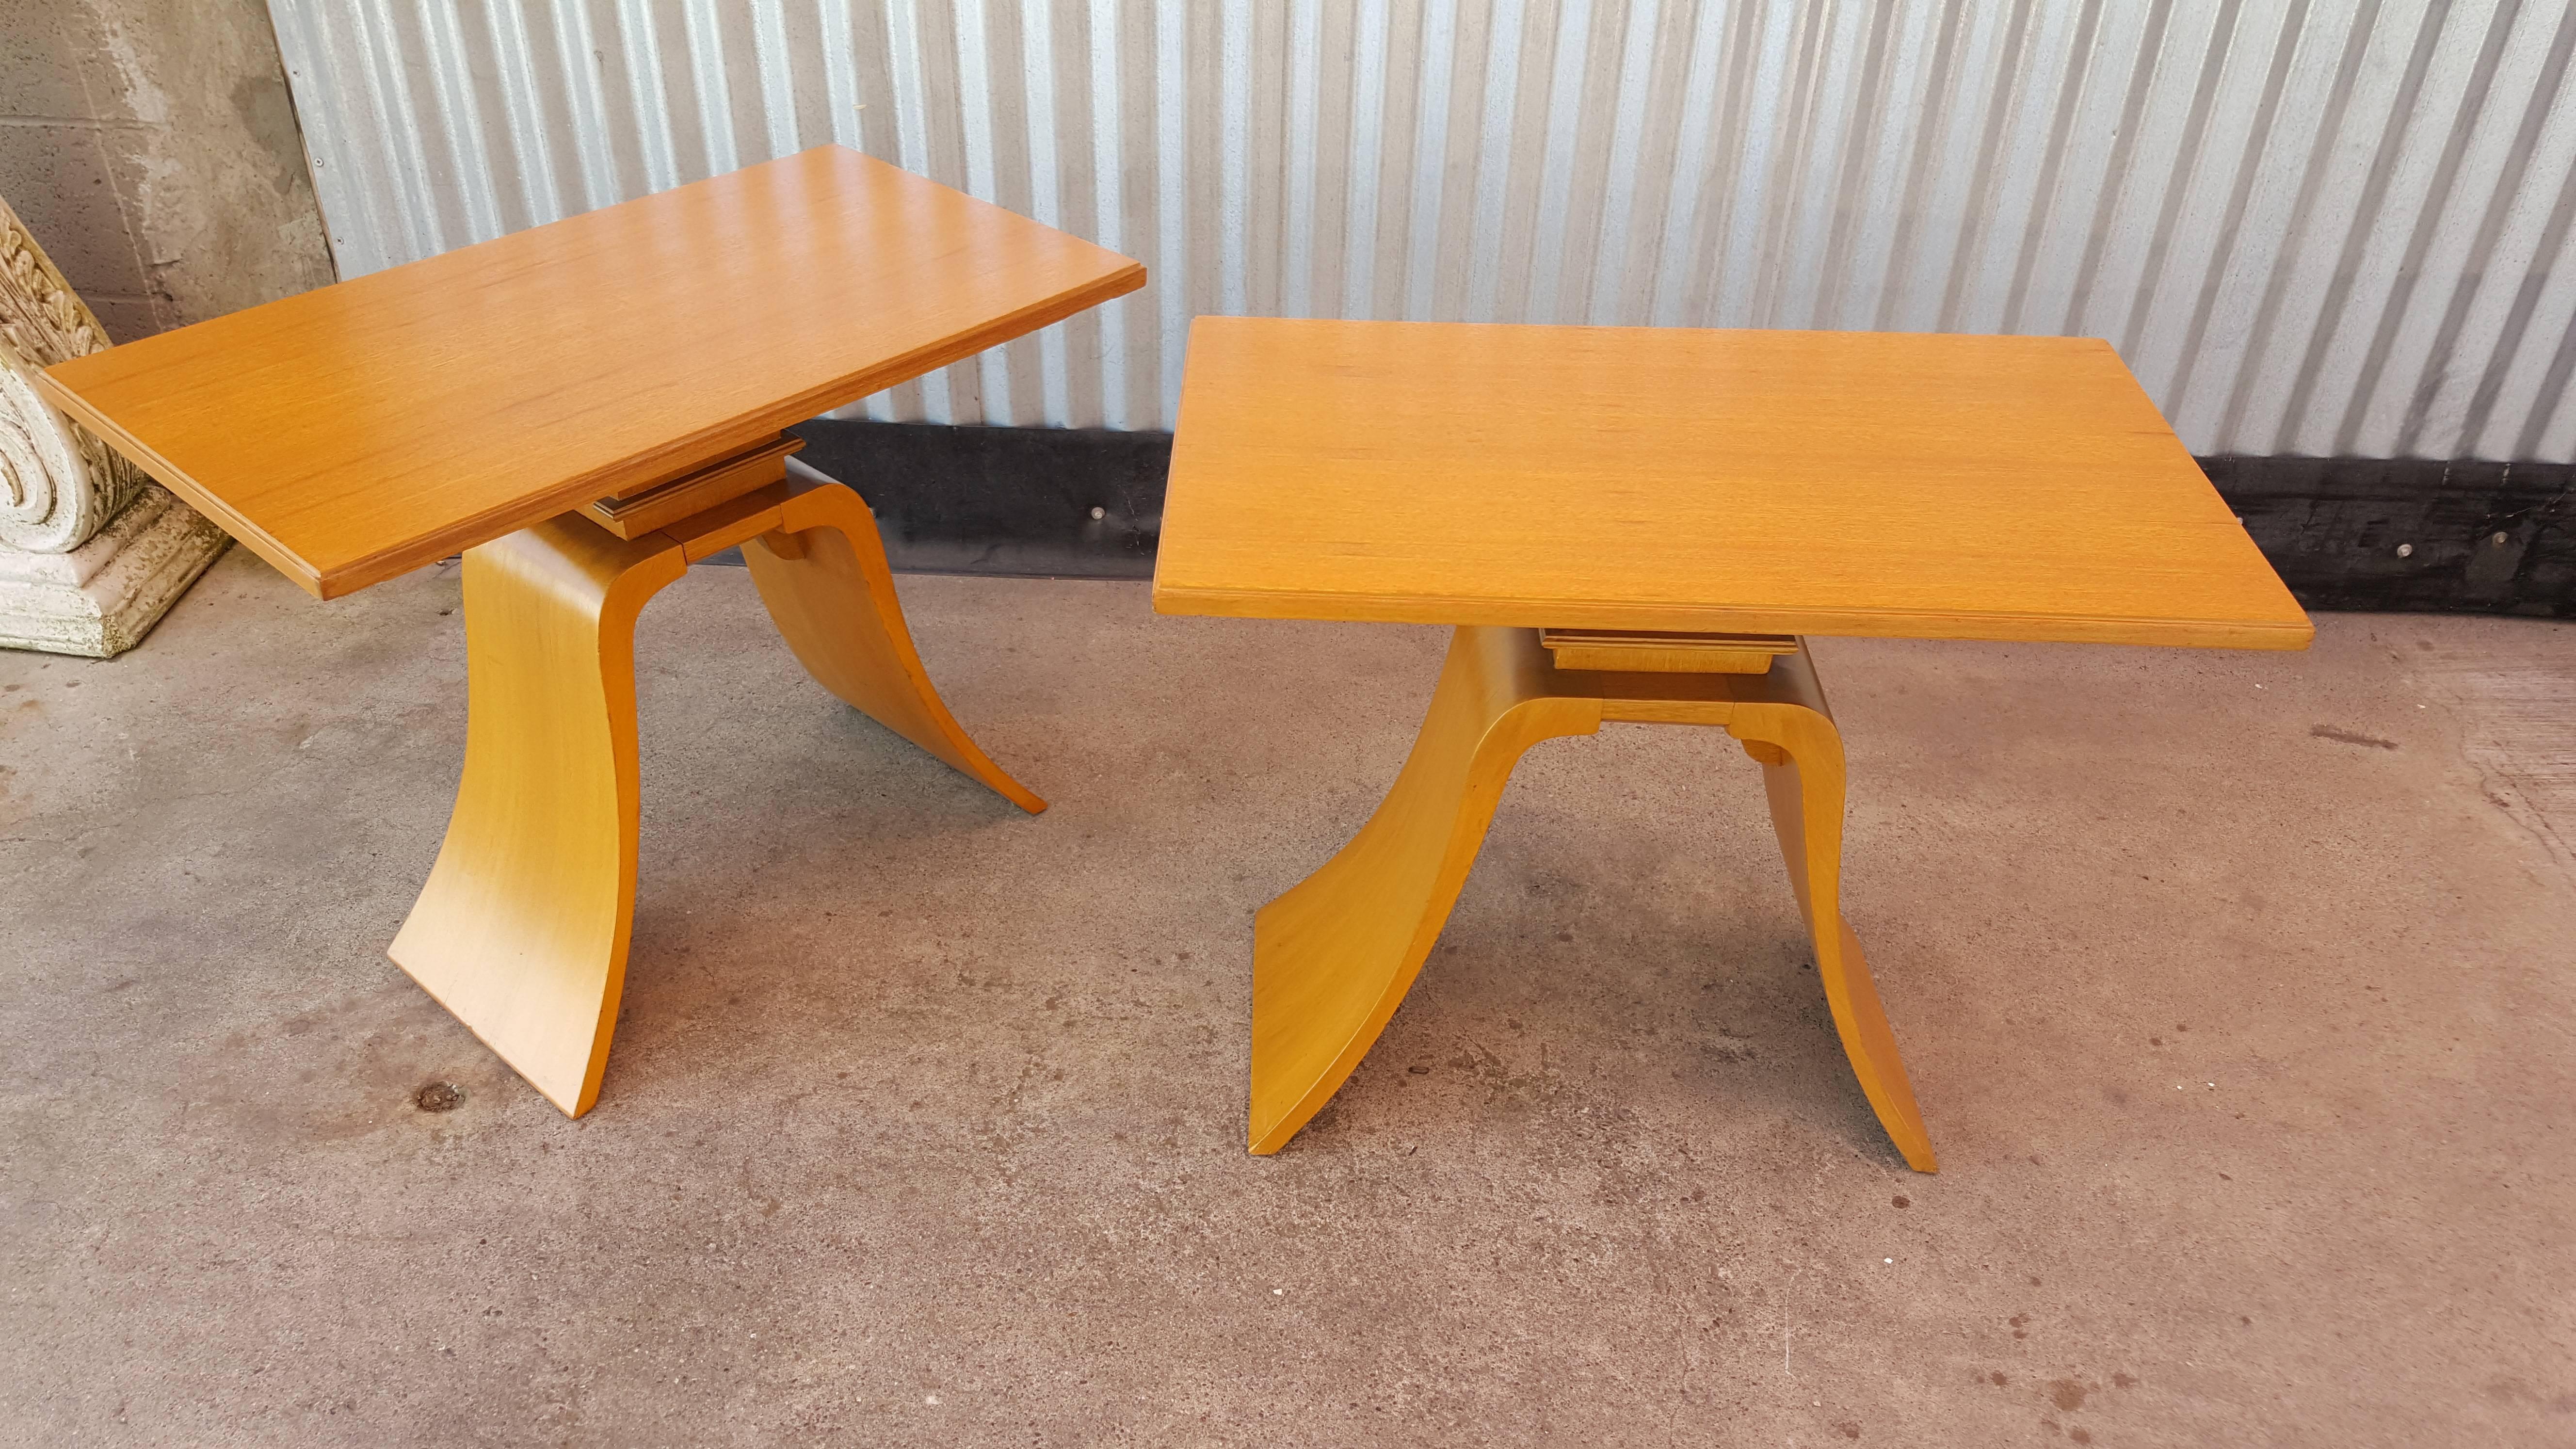 Classic, elegant and unique design describes these 1940s modern end tables. Designed by Paul Frankl for Brown-Saltman of California. Sculptural bell shaped bases, machine-age style molding detail. Excellent vintage condition with newly refinished